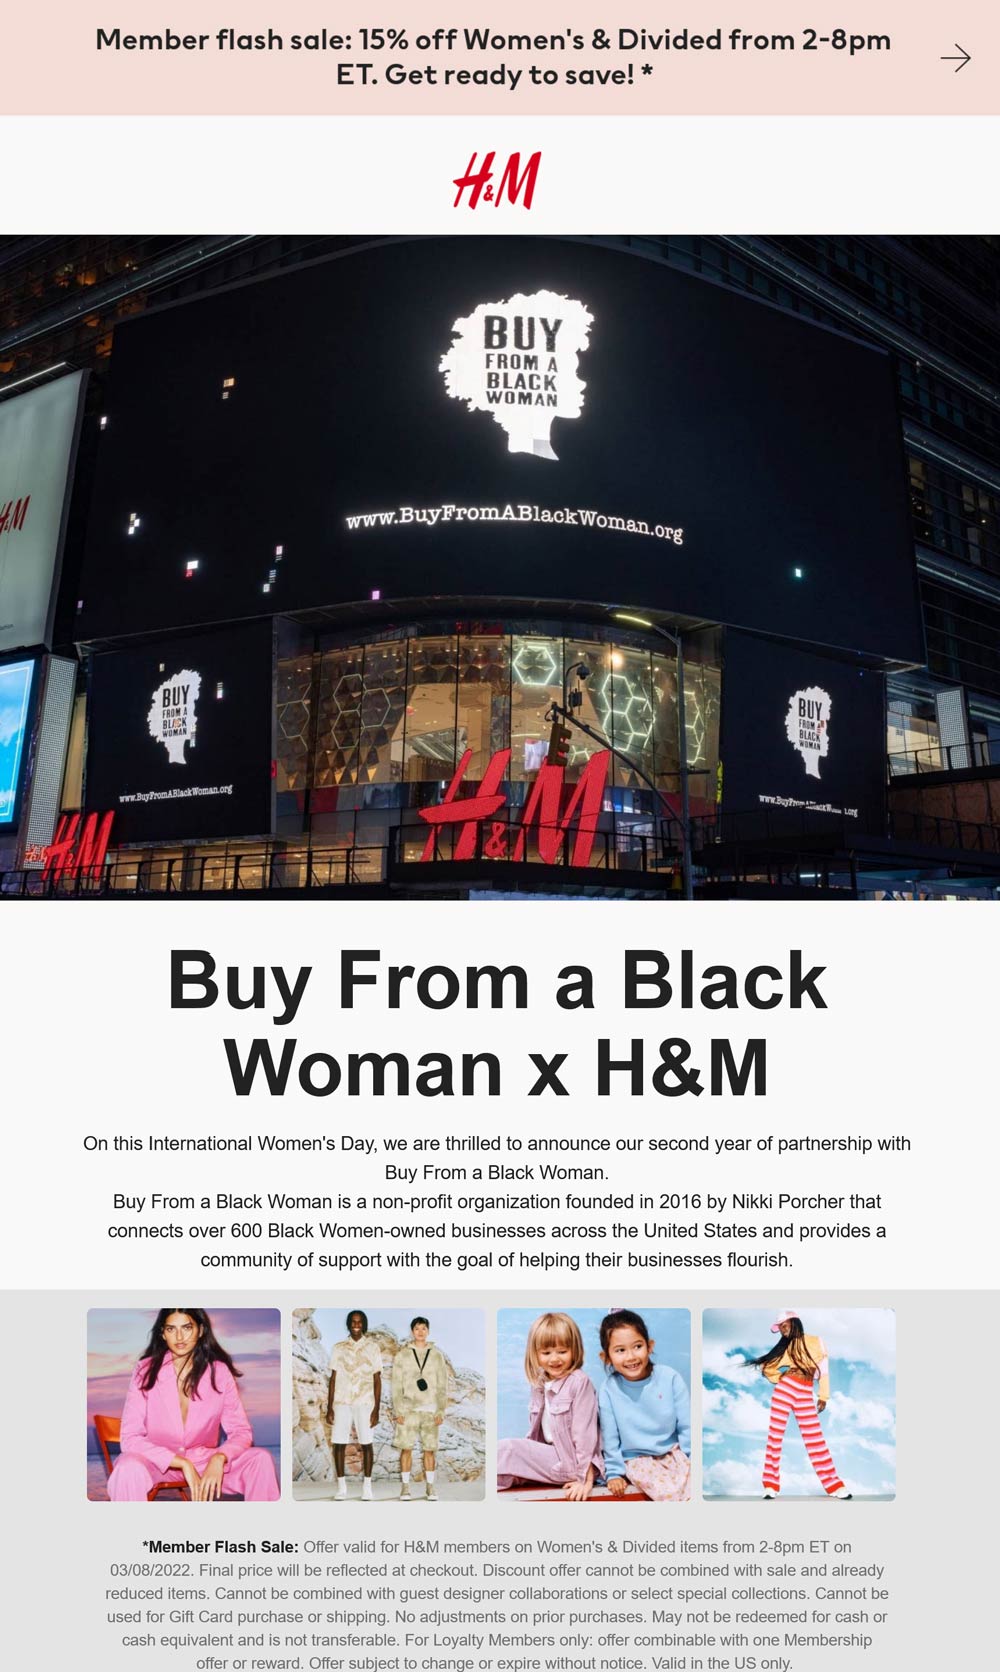 H&M stores Coupon  15% off womens today 2-8p at H&M #hm 